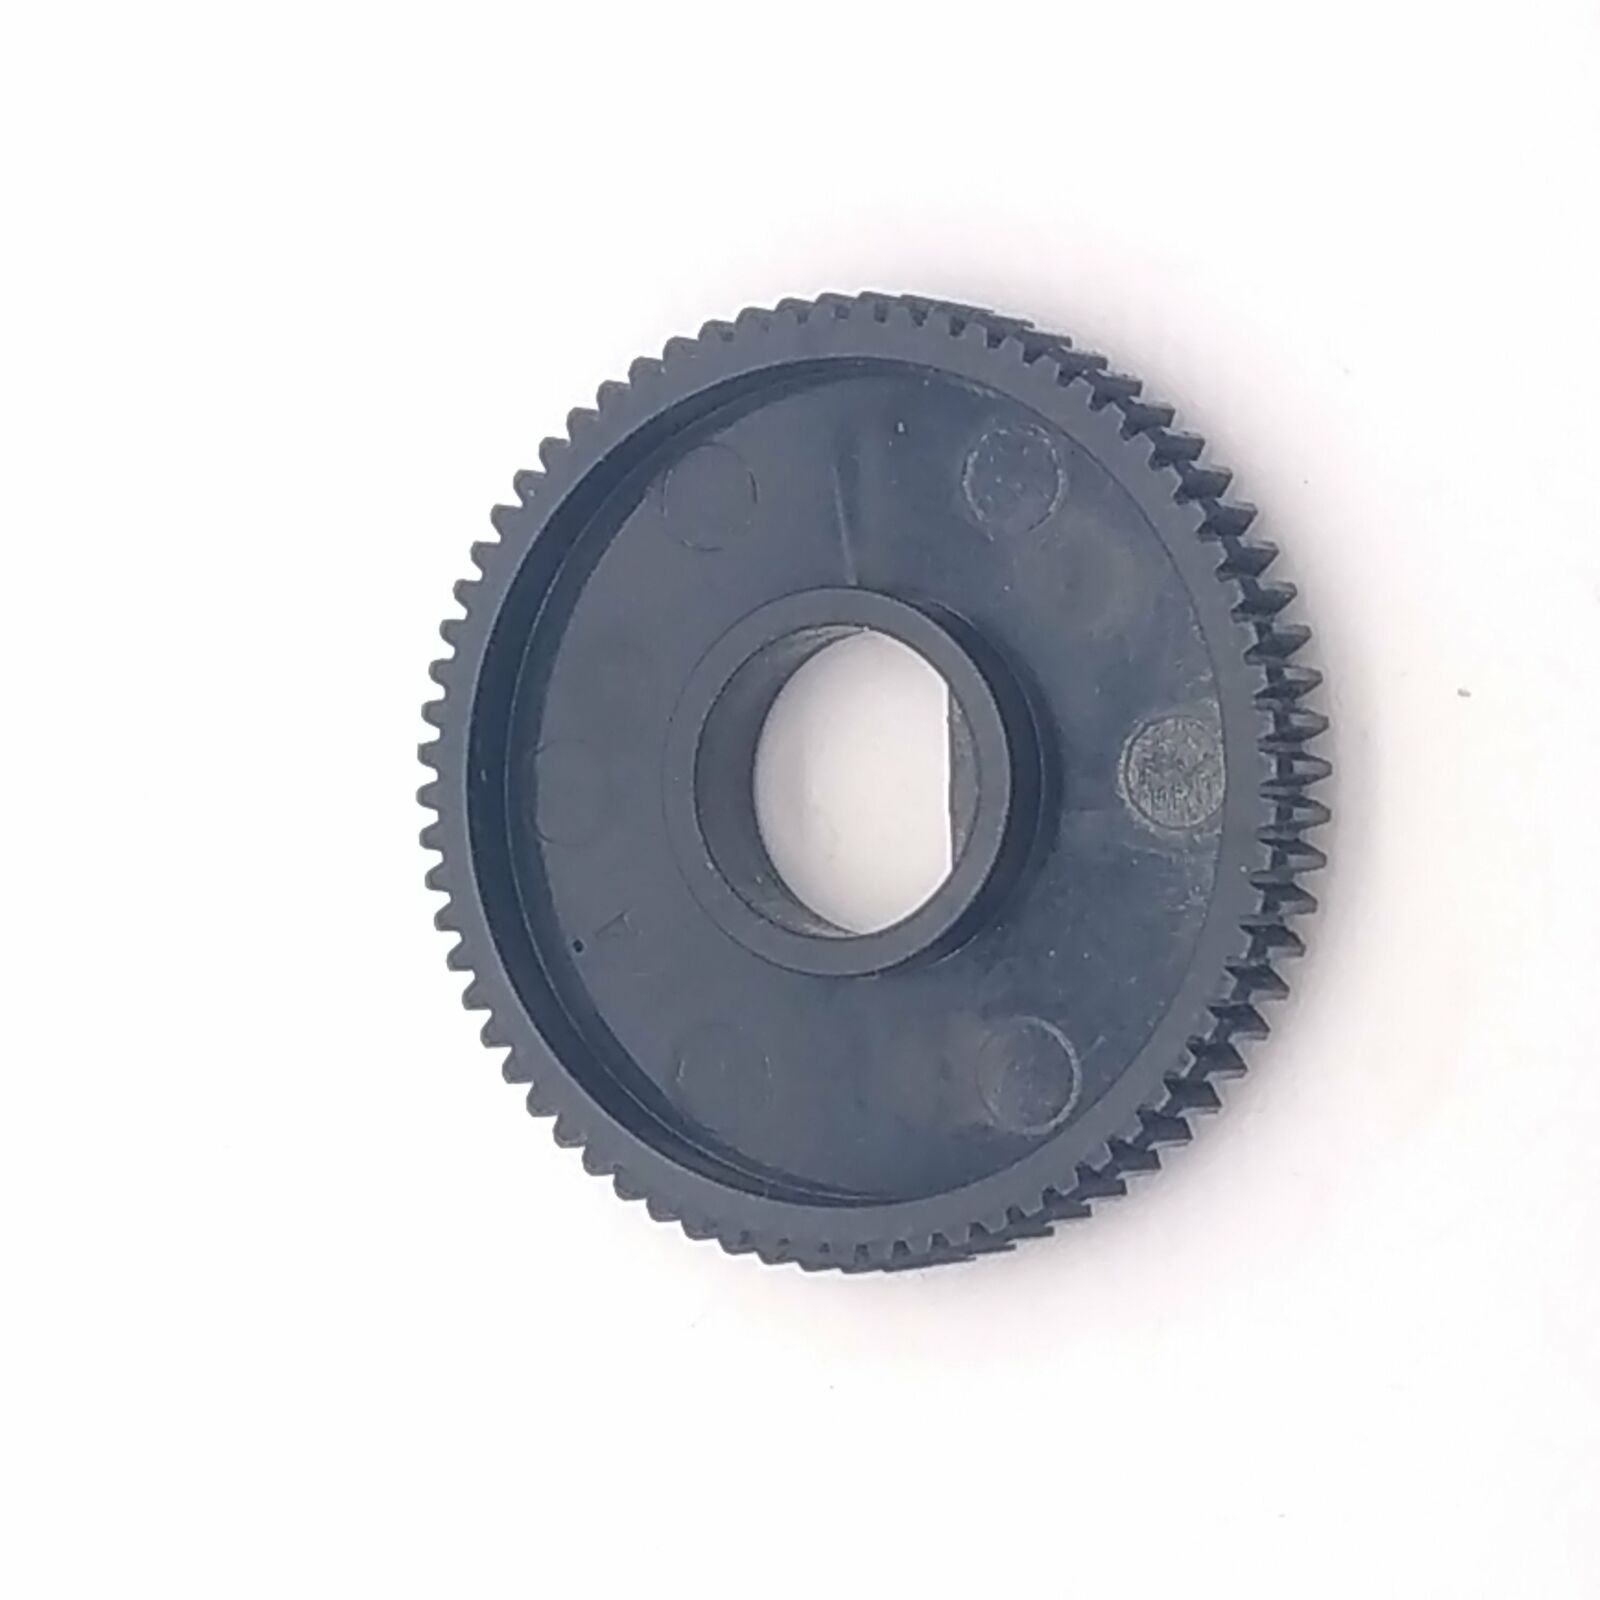 Platen roller bushing roller pinion gear cover fit for eps LX300+II LX-300 LX300